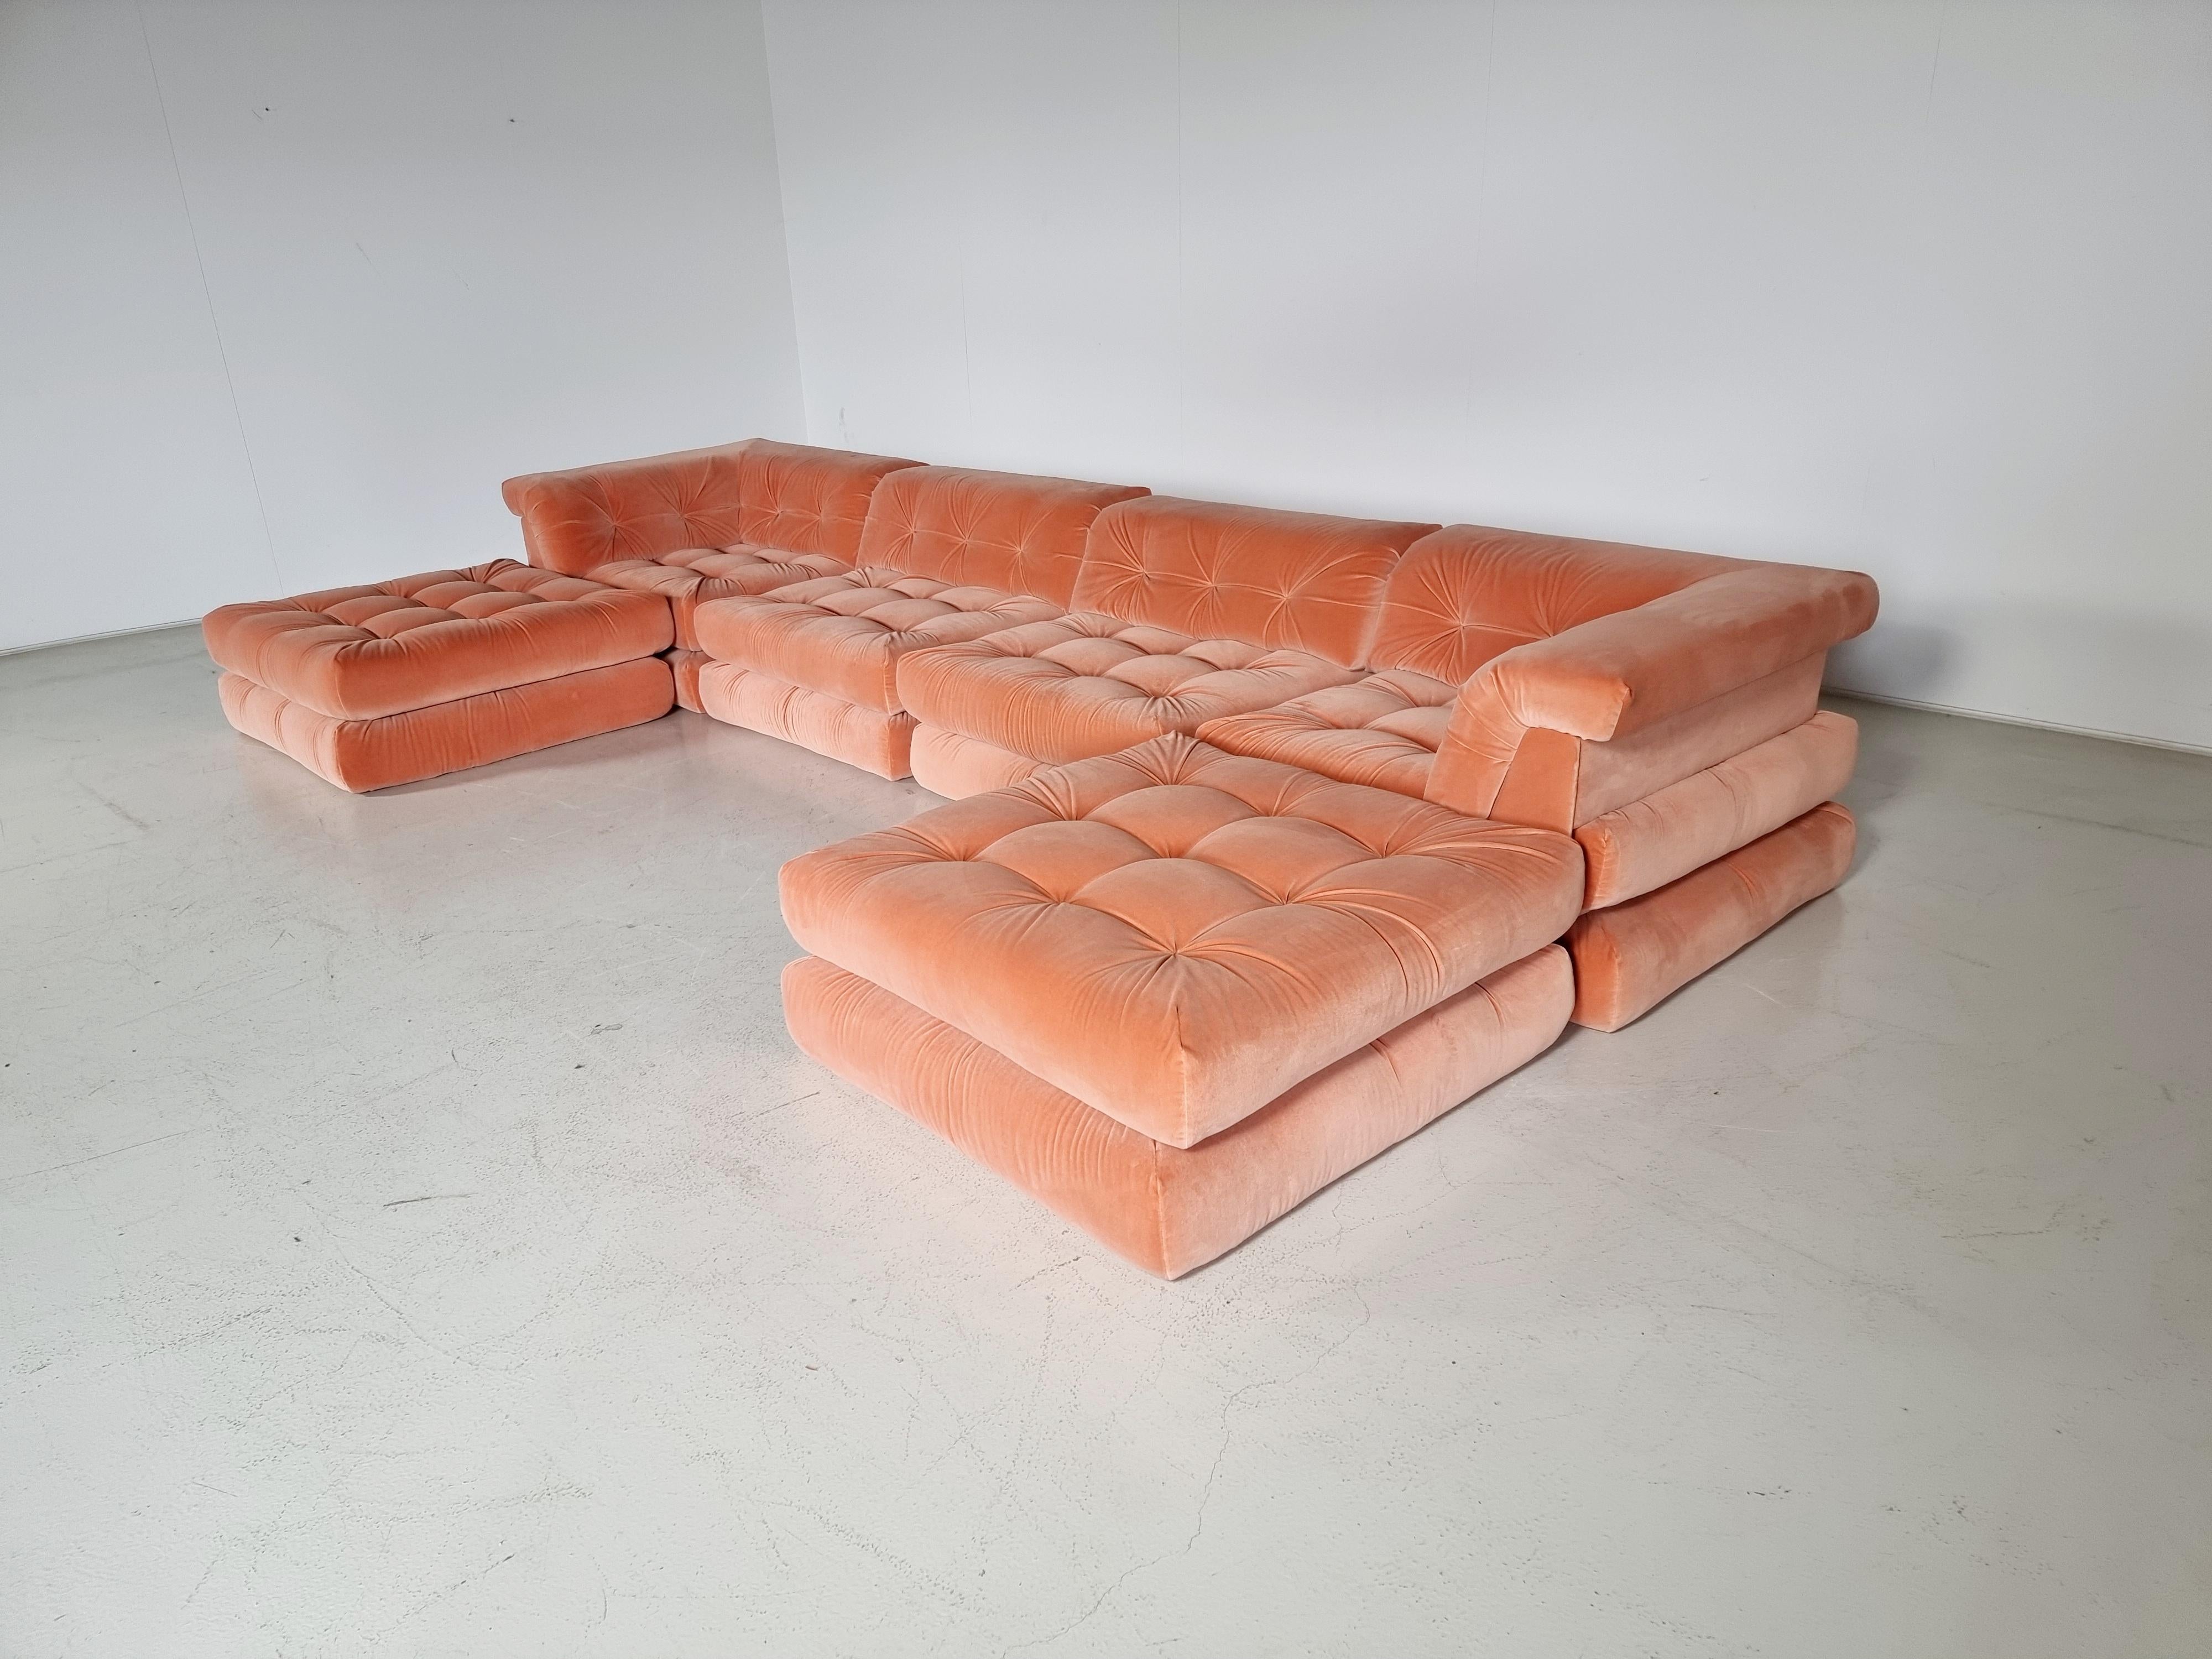 1st edition reupholstered Mah Jong modular sofa set by Hans Hopfer, designed in 1971 for Roche Bobois. It features multiple cushions that can be arranged in an endless number of ways, This set includes 12 cushions and 4 backrests. 

Hopfer’s Mah